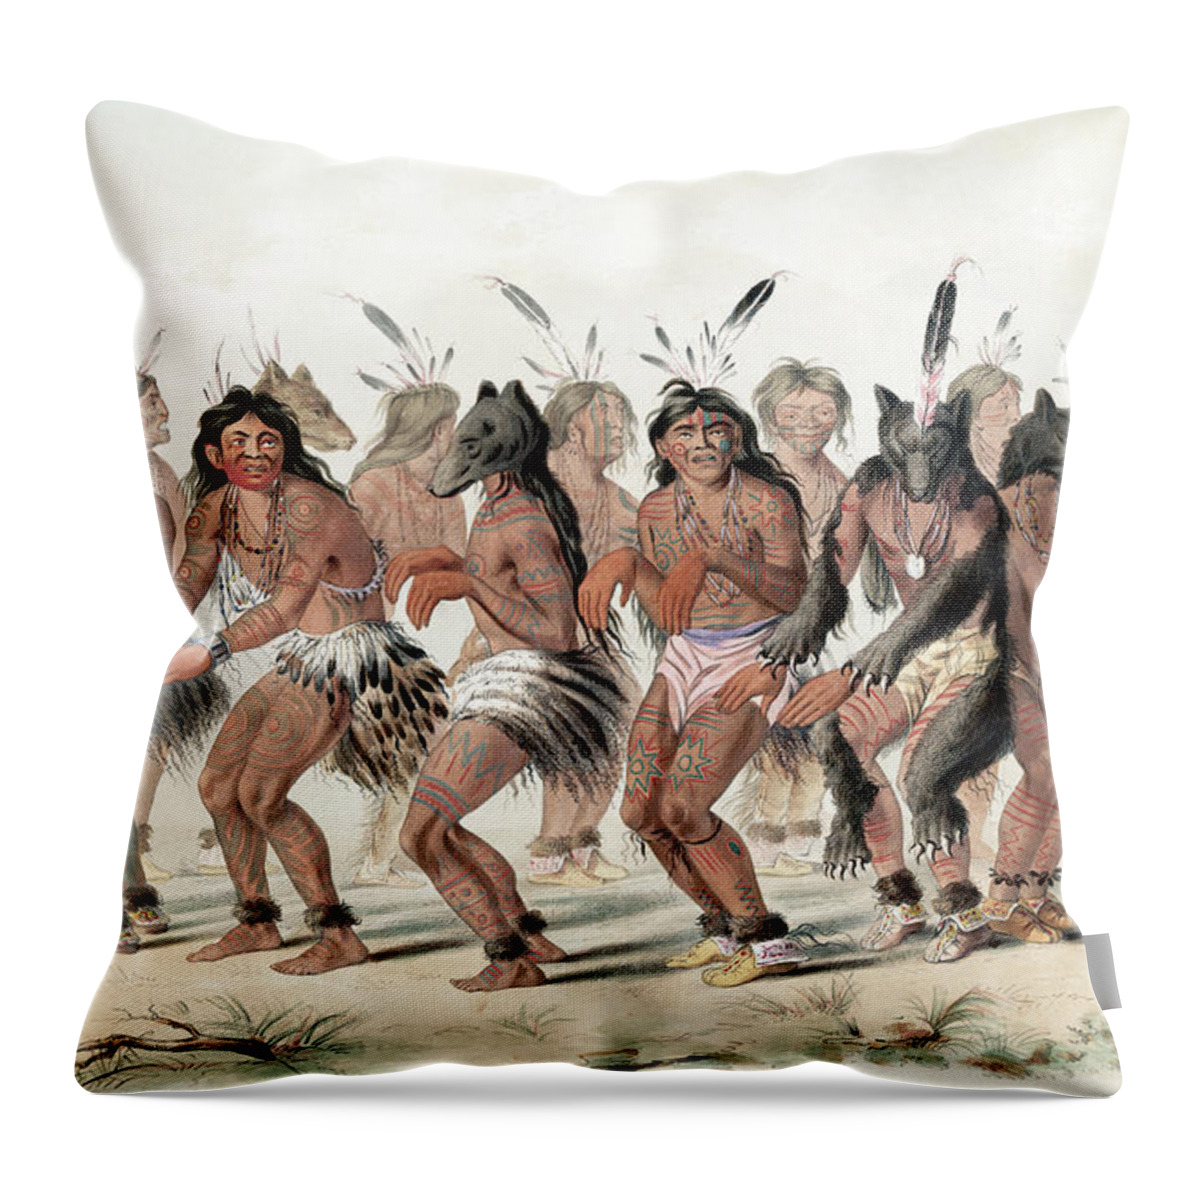 1845 Throw Pillow featuring the painting Bear Dance, 1845 by George Catlin